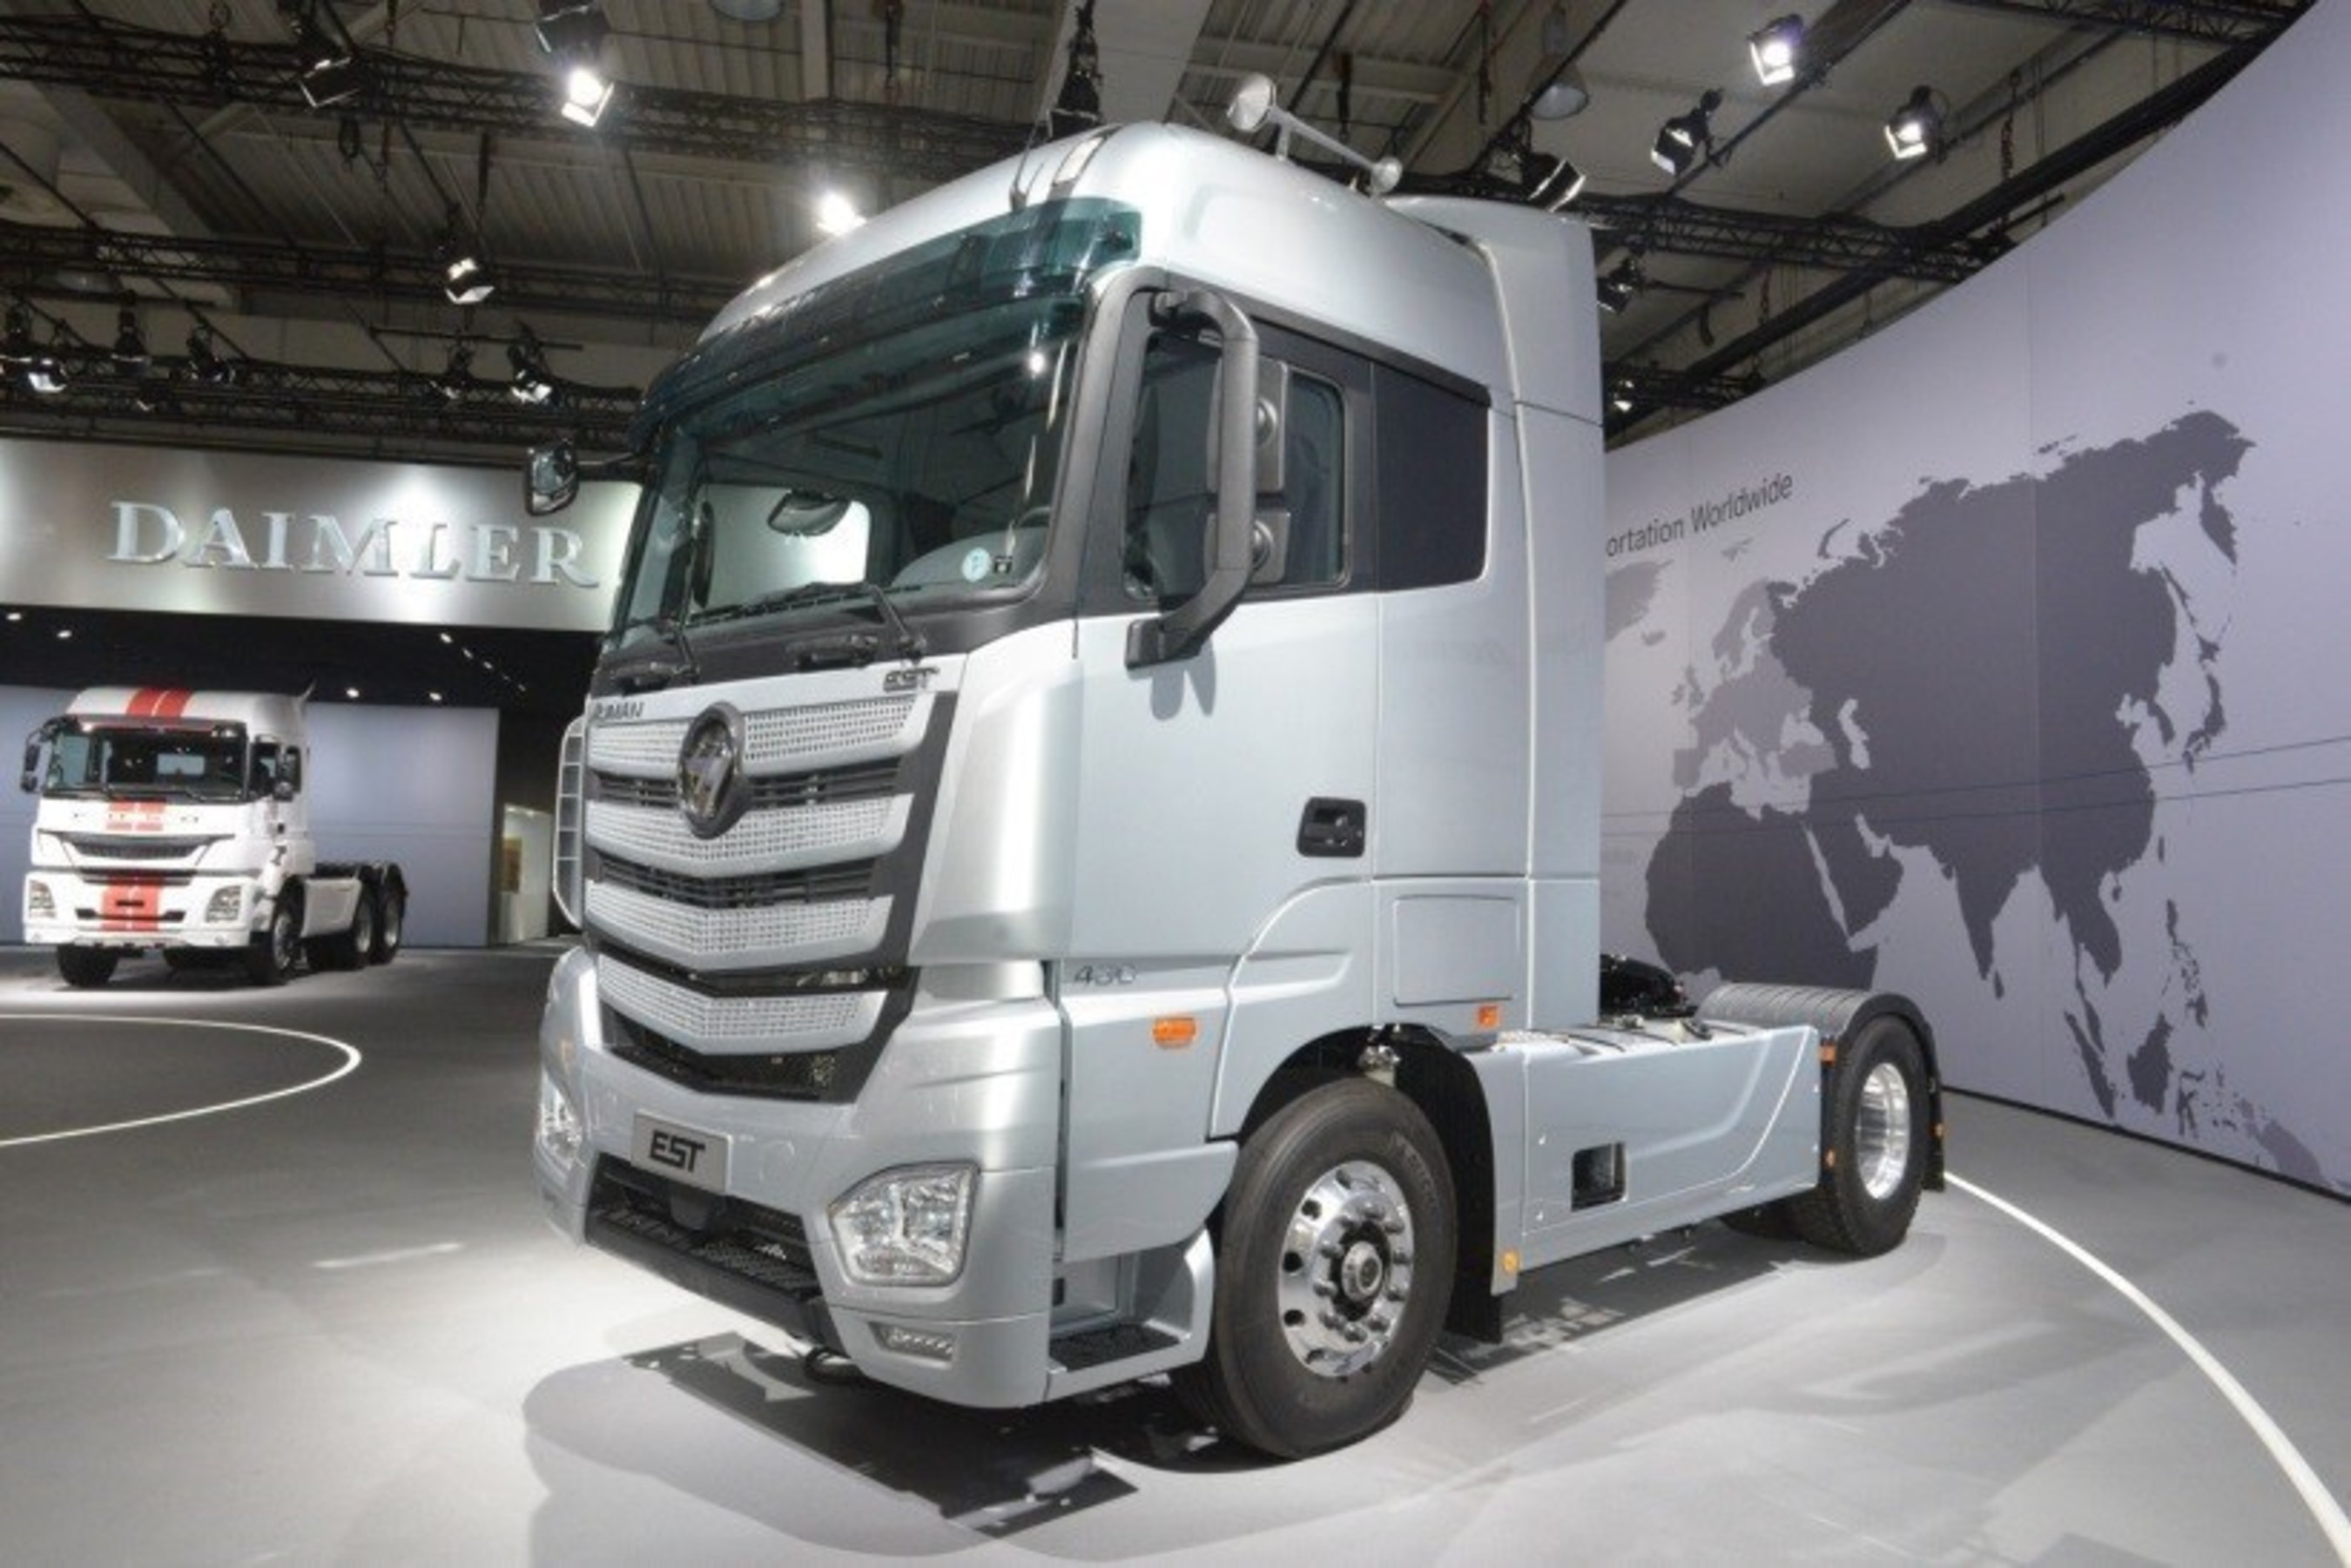 Foton Auman EST Super Truck Making Debut on IAA Commercial Vehicles in Hannover